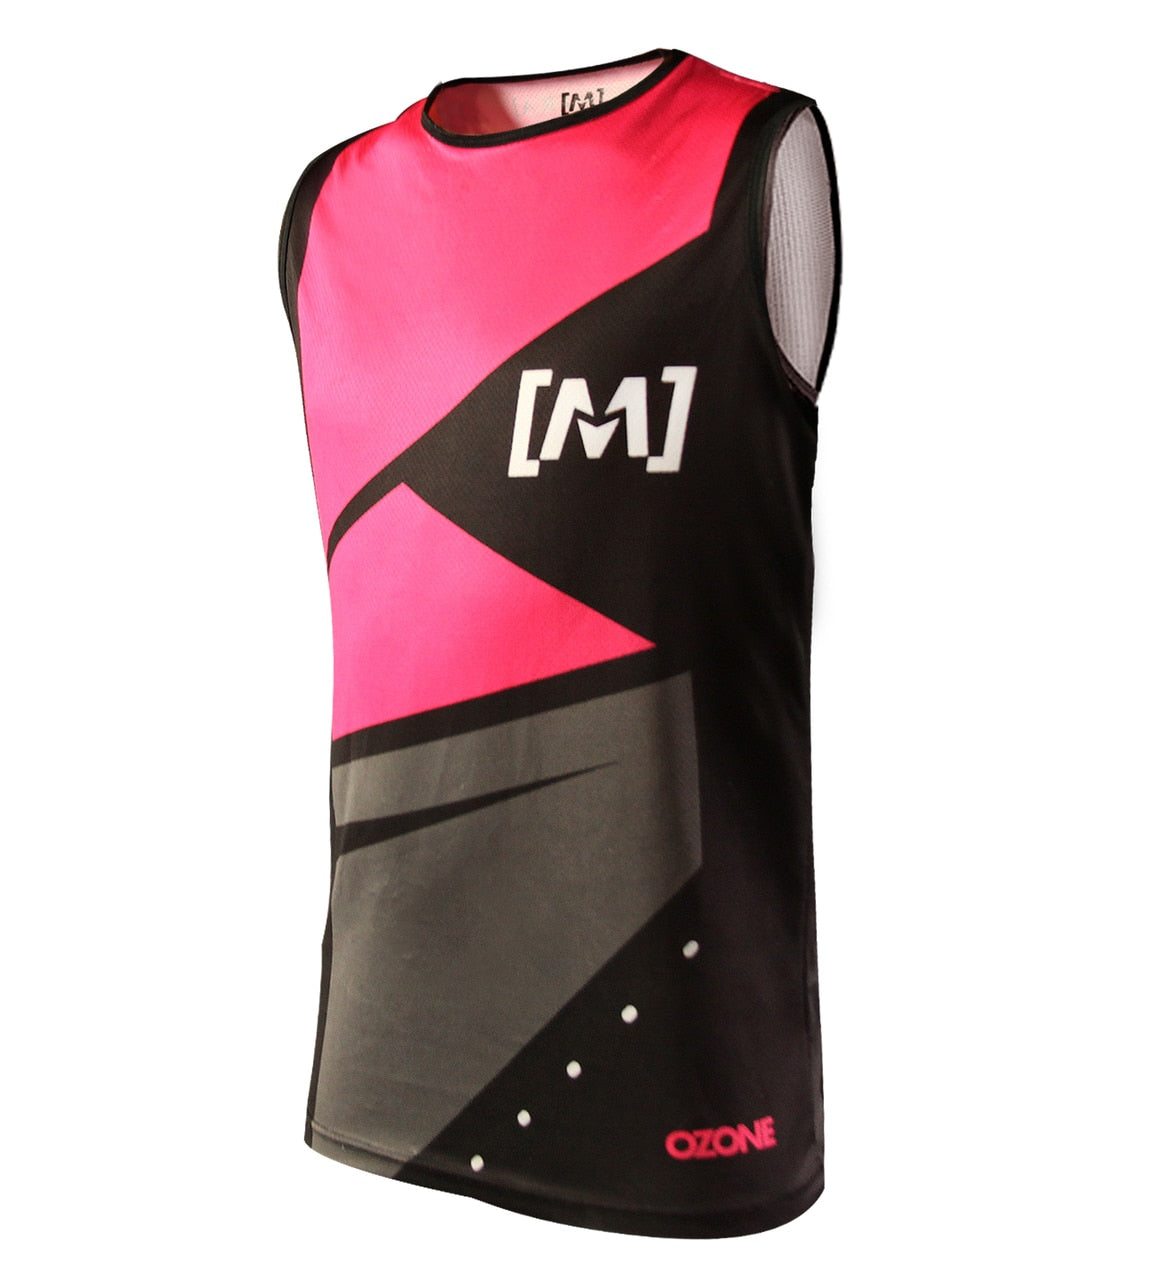 jersey black and pink